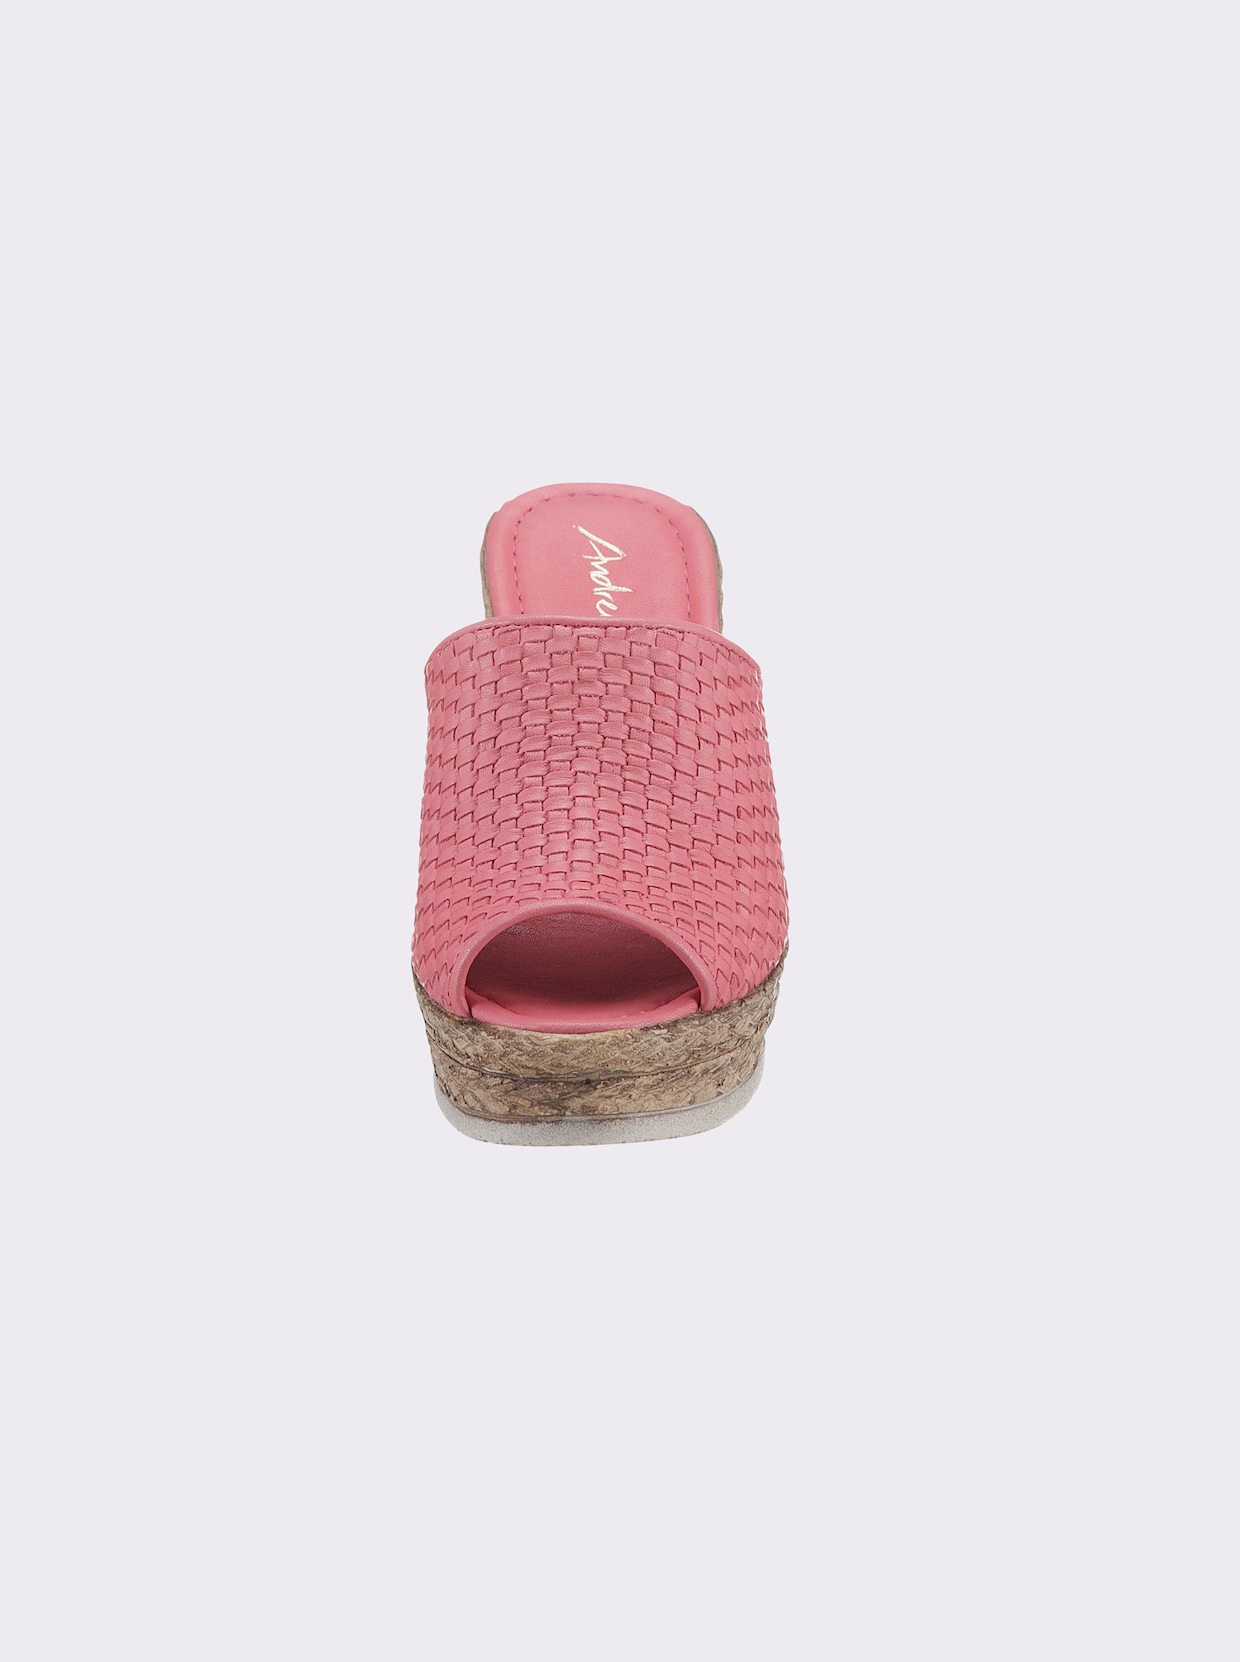 Andrea Conti slippers - pink